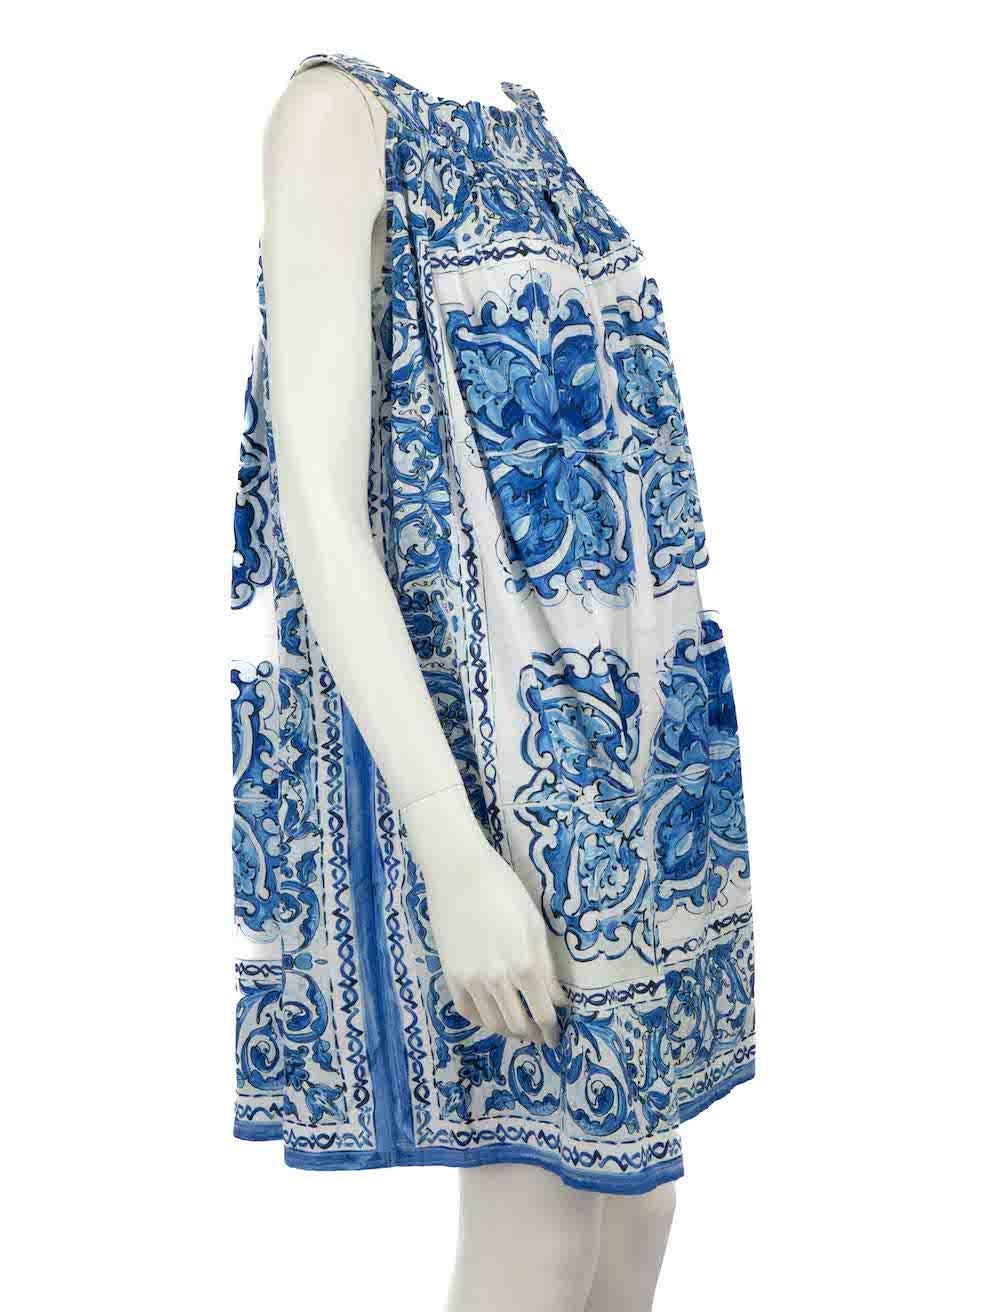 CONDITION is Very good. Minimal wear to dress is evident. Minimal wear to the neckline lining with light discolouration and a small mark to the front on this used Dolce & Gabbana designer resale item.
 
 Details
 Blue
 Cotton
 Dress
 Tiled print
